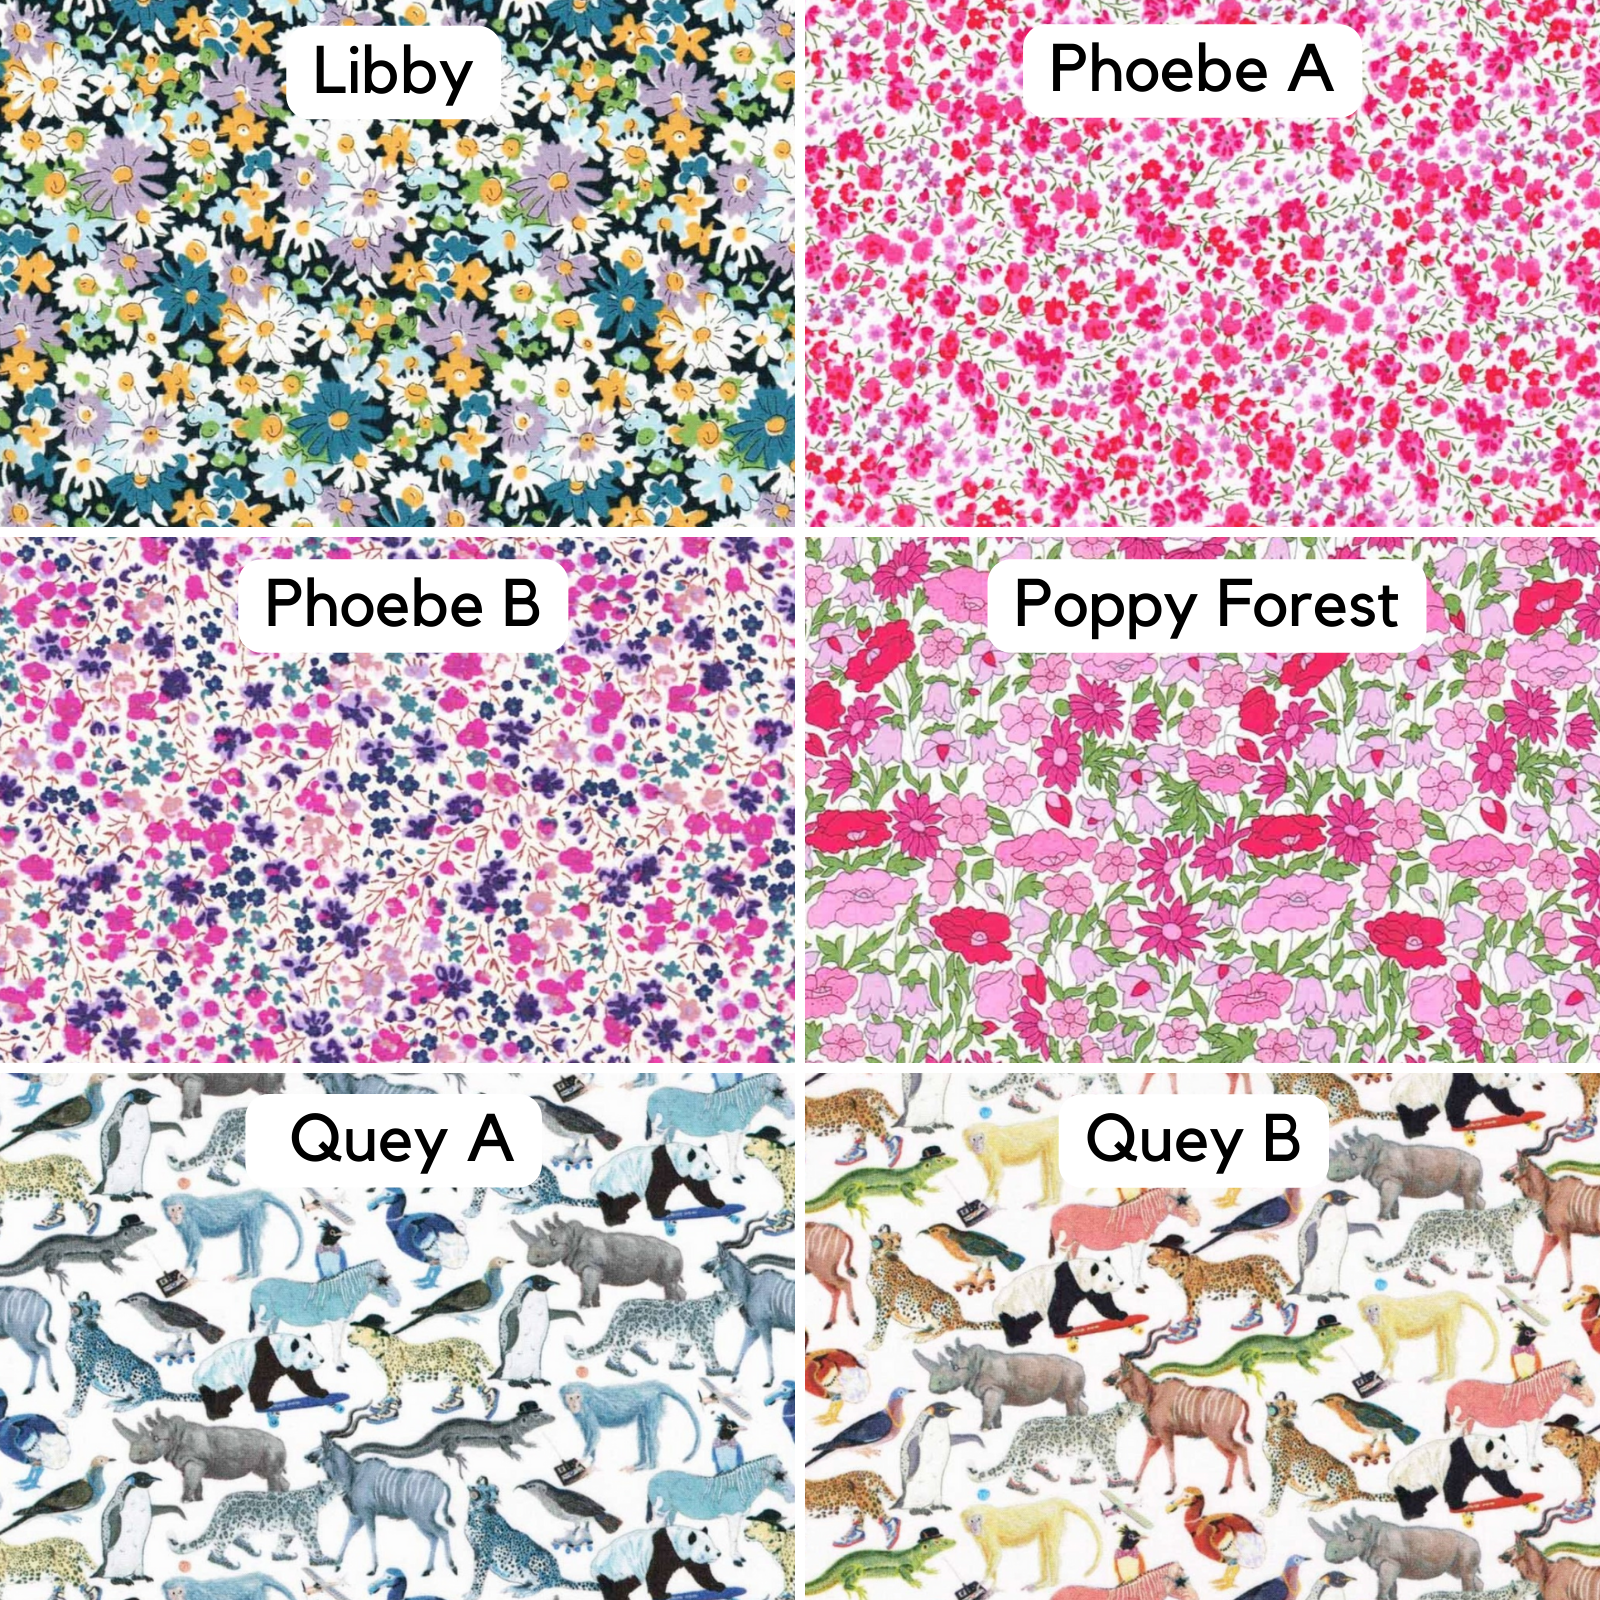 Image of 6 Liberty prints - Libby, Phoebe A, Phoebe B, Poppy Forest, Quey A and Quey B which are all fabric options for an appliqued initial on our personalised nursery / school bags